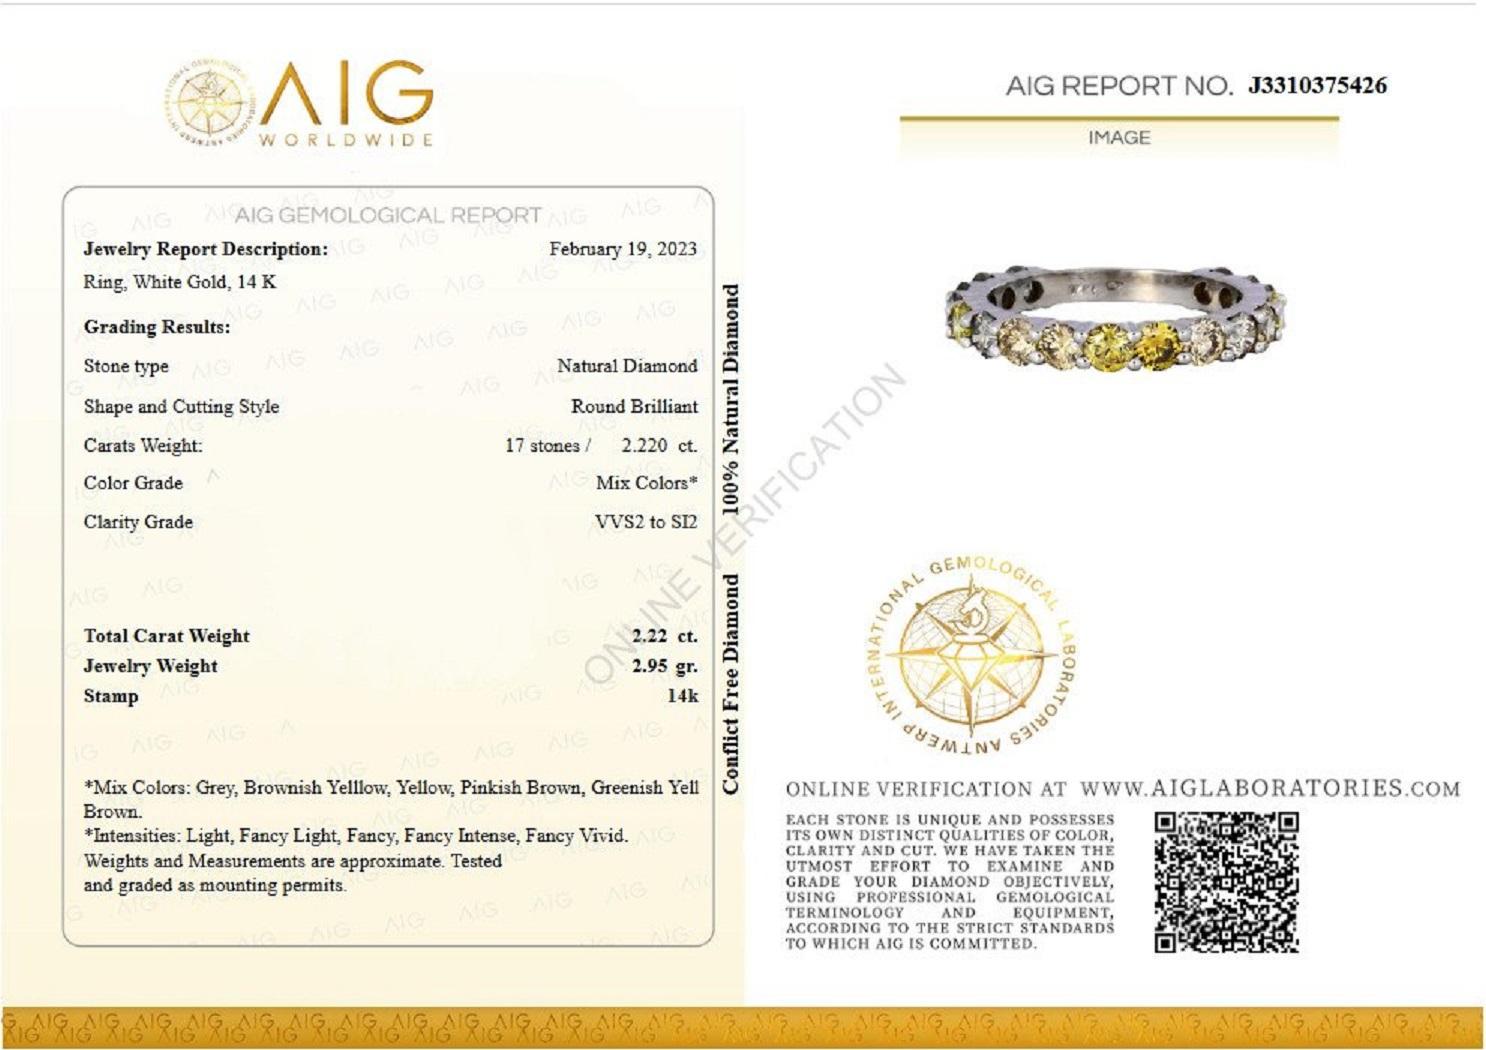 ** In Hong Kong and the USA the VAT is 0%.

Ring can be sized free of charge prior to shipping out.

Center Stone:
___________
Natural Diamond
Cut: Round Brilliant
Carat: 2.22 cttw / 17 stones
Color: Mix Colors
Clarity: VVS2 to SI2

Item ships from